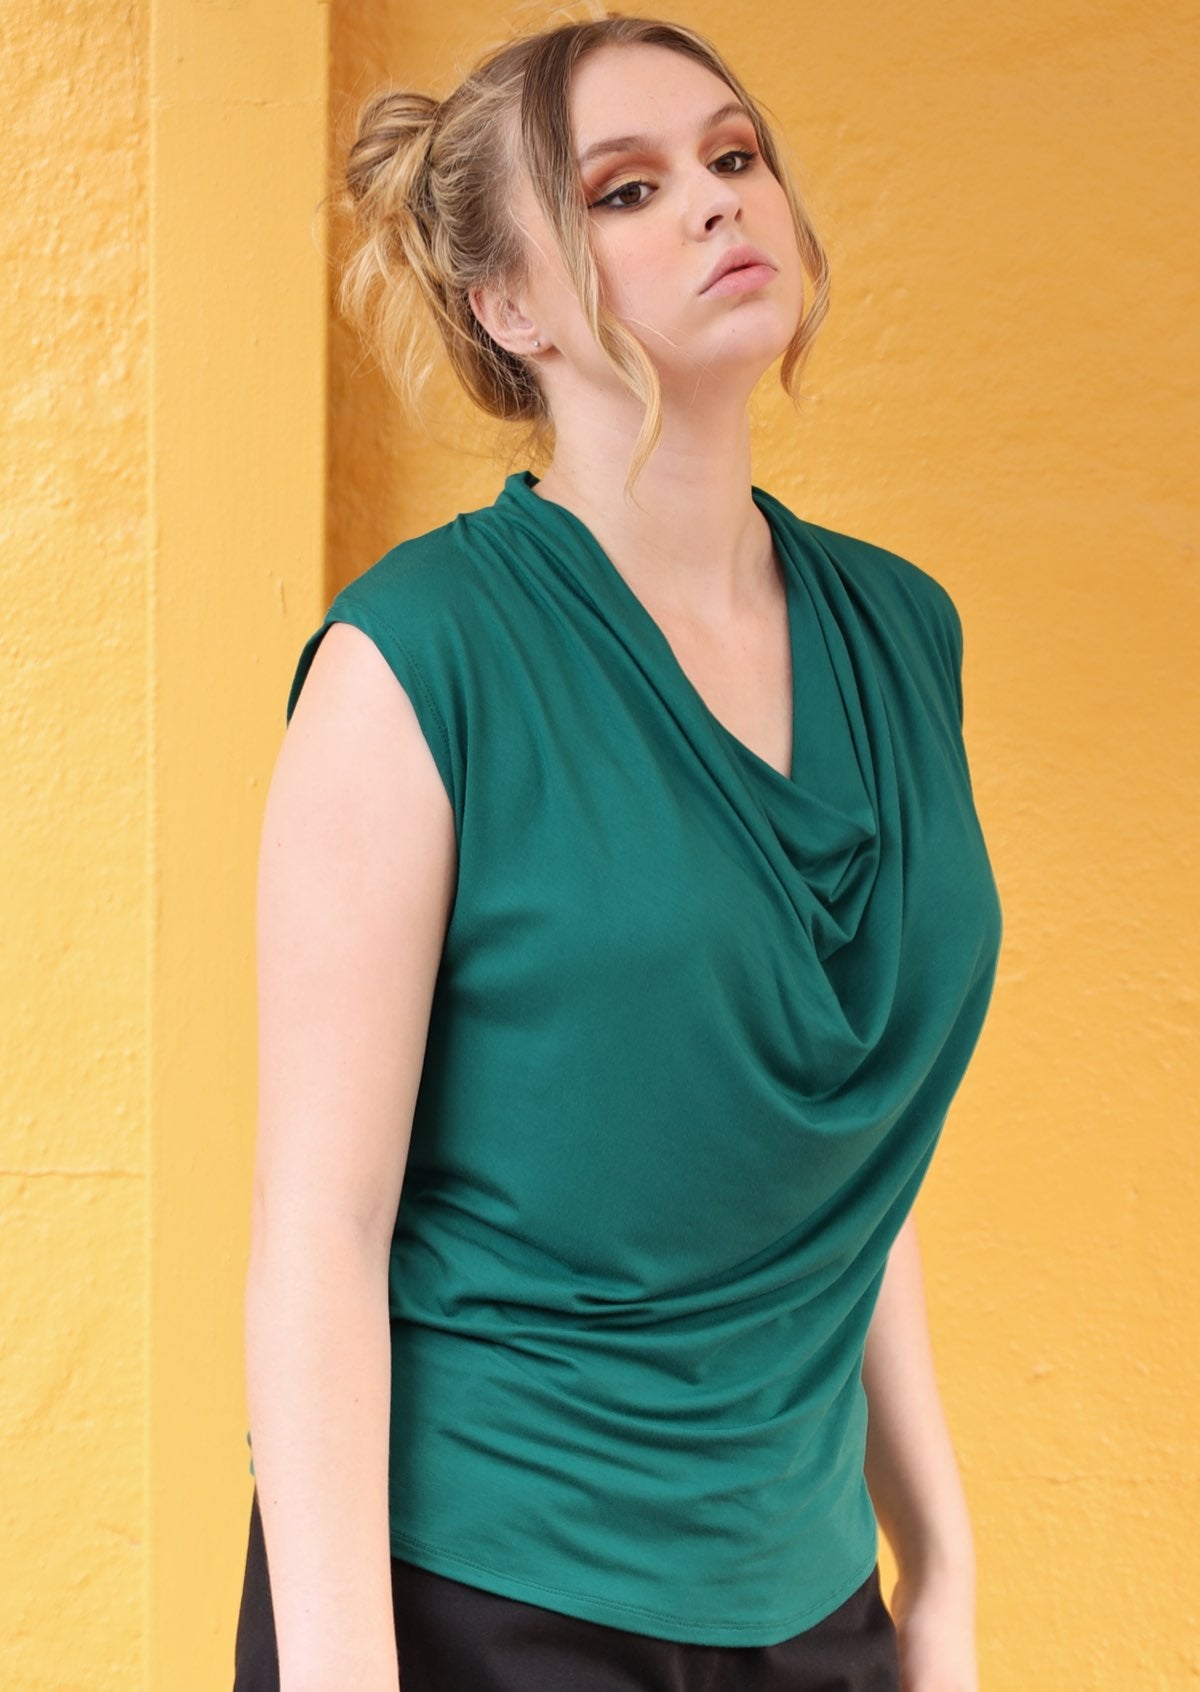 Woman wearing a sleeveless cowl neck jade green top in front of a yellow wall.